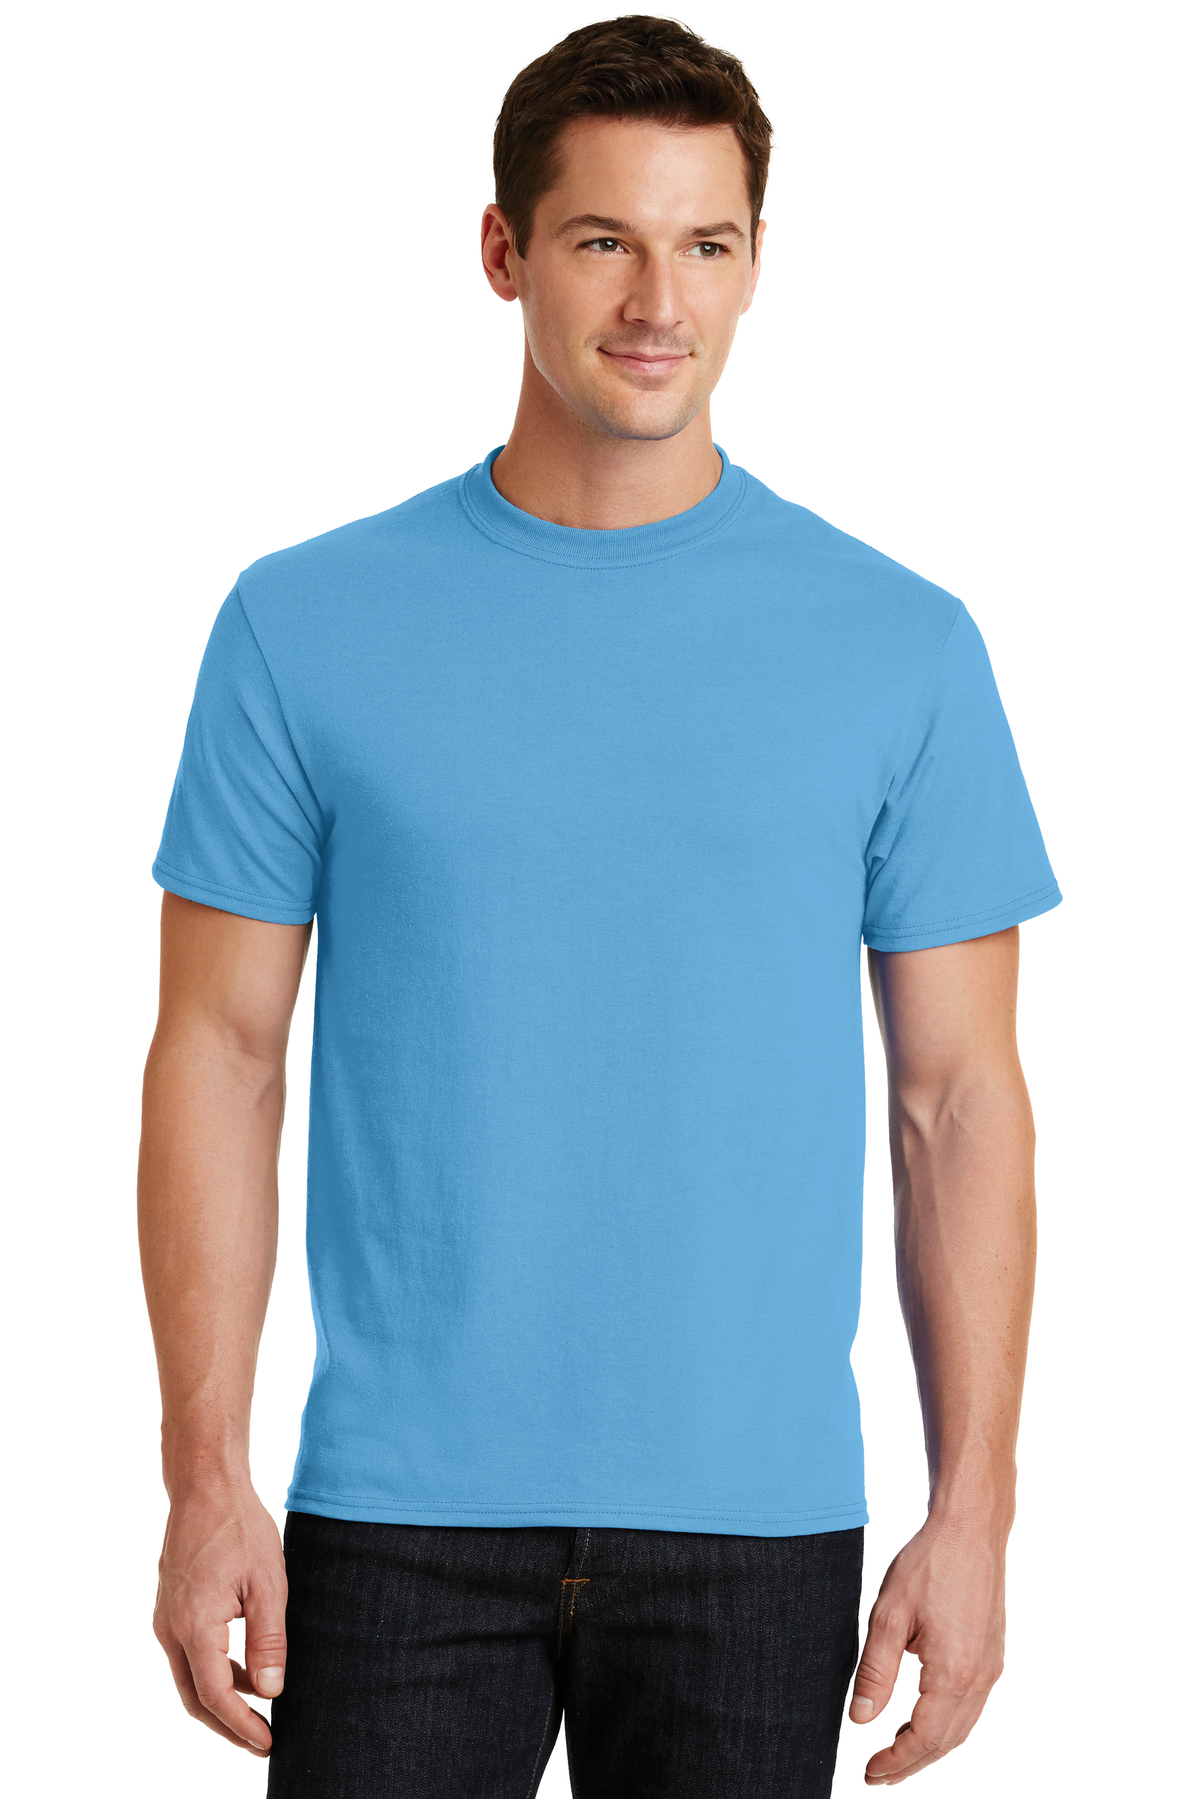 Port & Company Embroidered Men's Core Blend Tee | T-Shirts - Queensboro